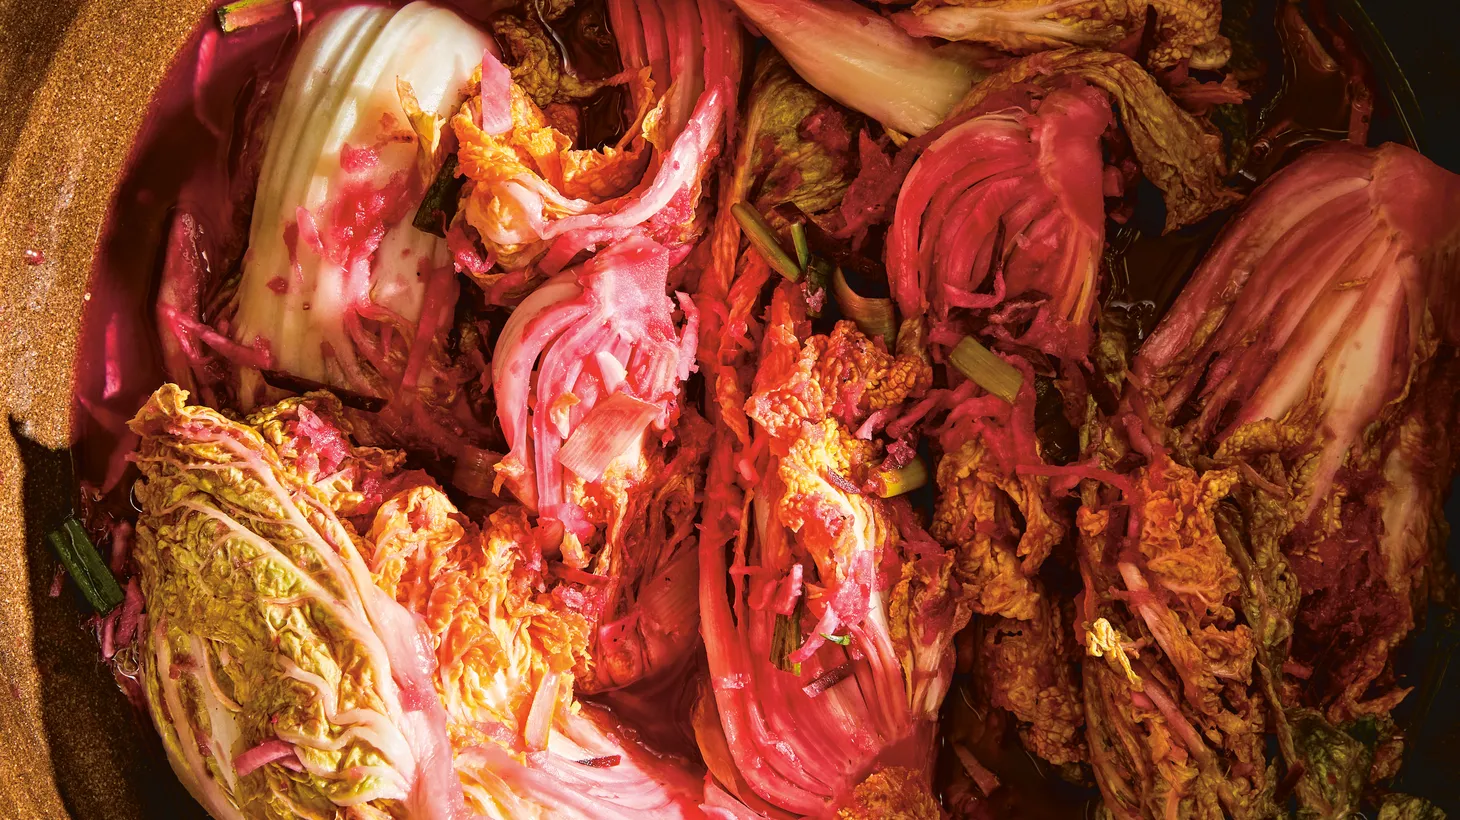 One of the lessons Eric Kim learned from his mother while writing “Korean American” was that in order to cook well, one has to be in the mood for it. He shares her recipe for kimchi in his new cookbook.